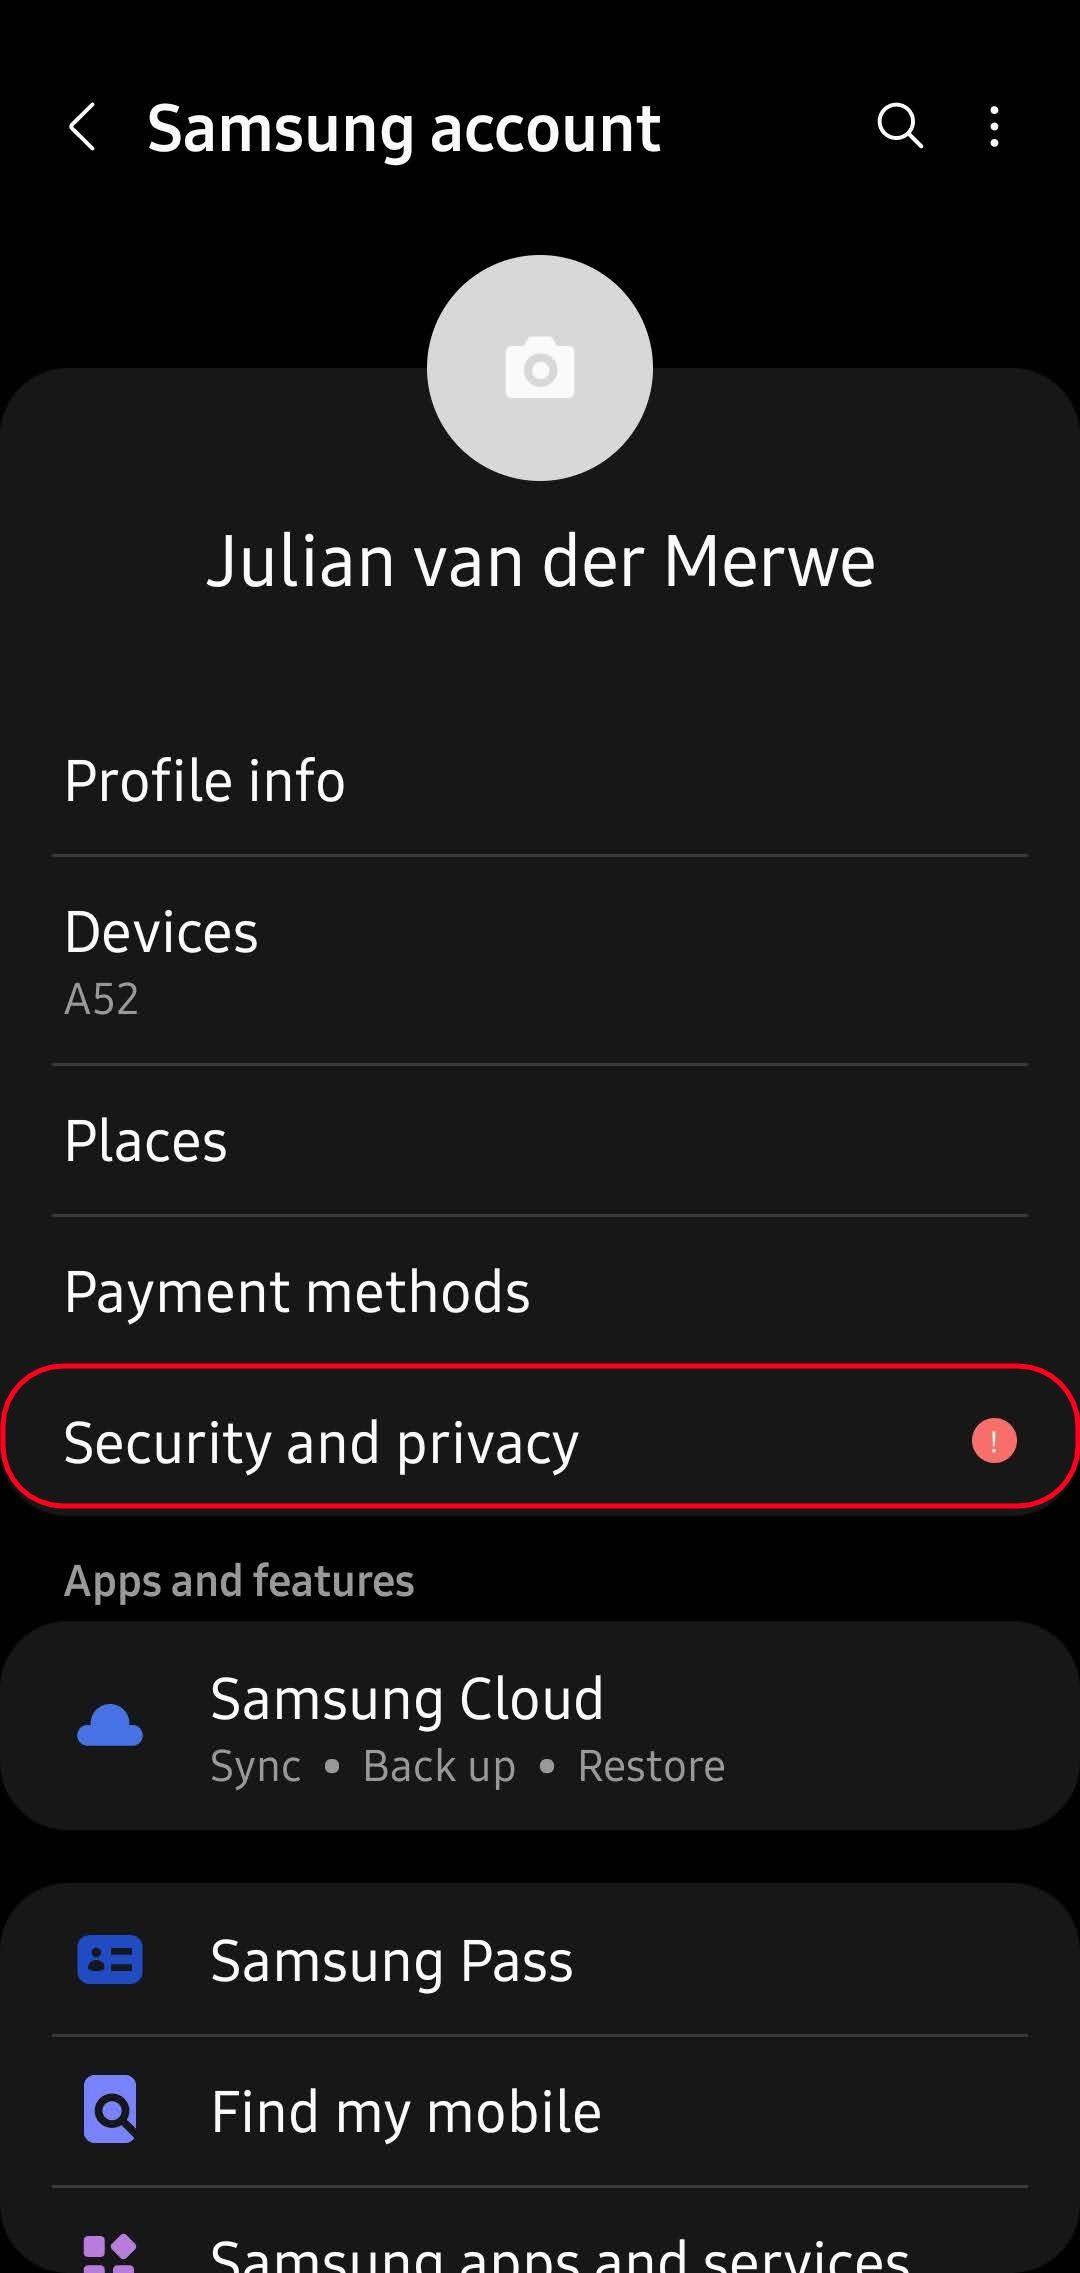 samsung account options with the security and privacy option highlighted.